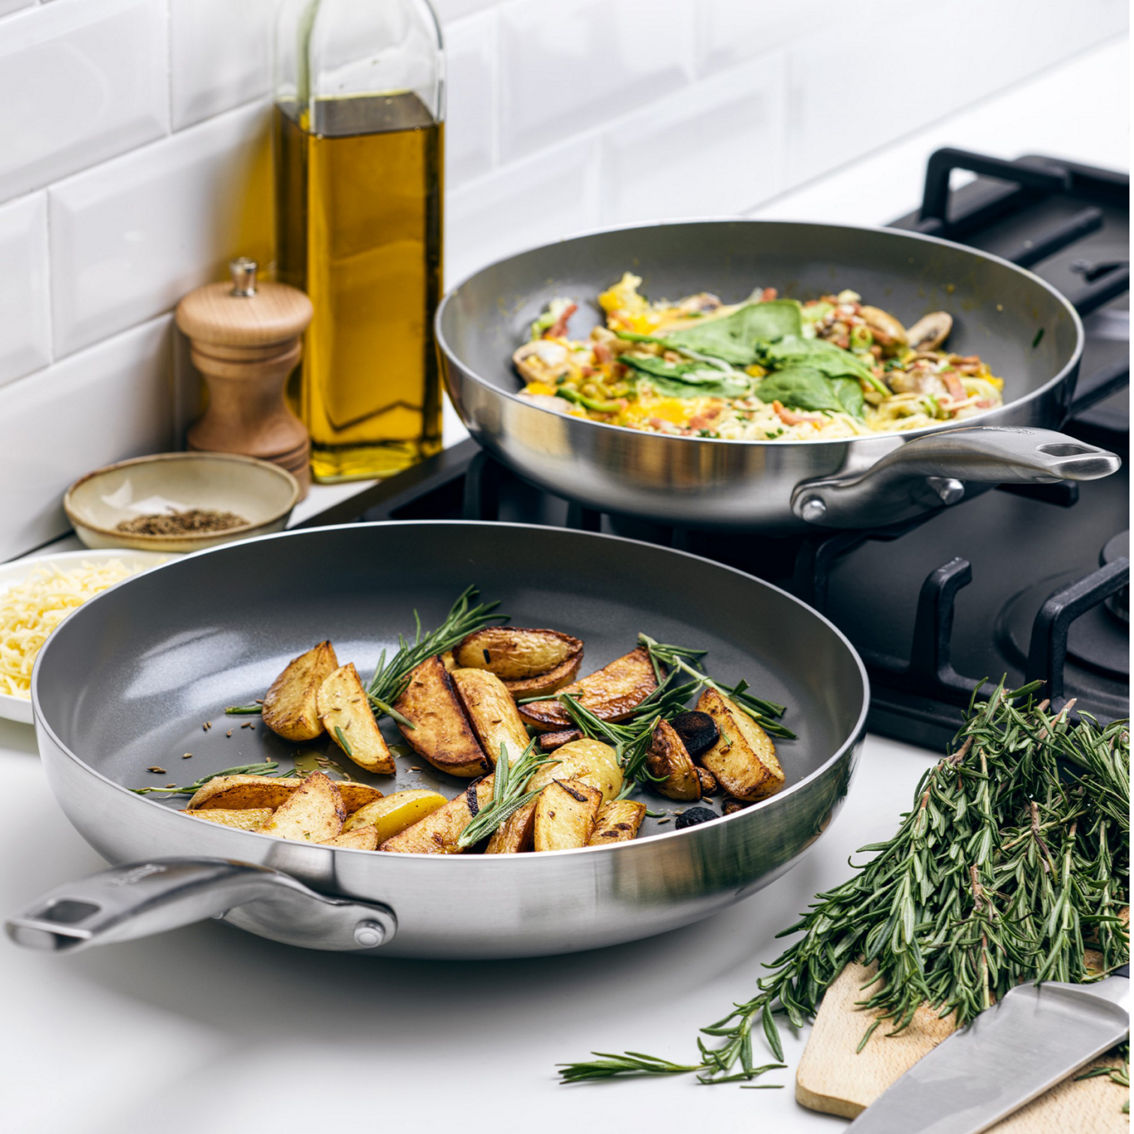 GreenPan Chatham Tri-Ply Stainless Steel Healthy Nonstick 3 pc. Skillet Set - Image 4 of 9